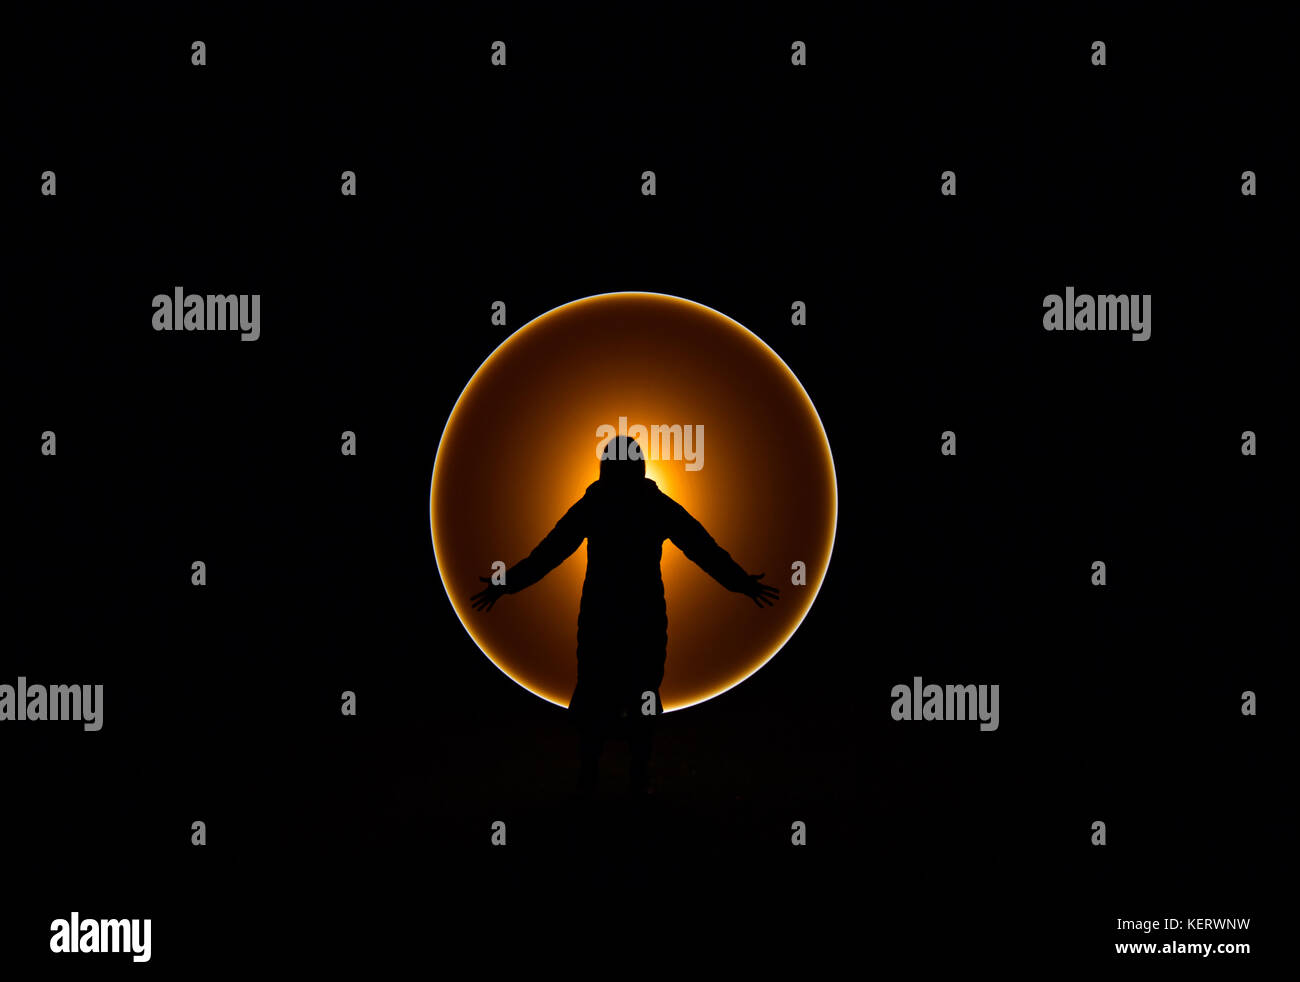 Silhouette of figure, arms outstretched, against unexplained, mysterious circle of glowing, orange light.Blacked out night scene with special lighting Stock Photo